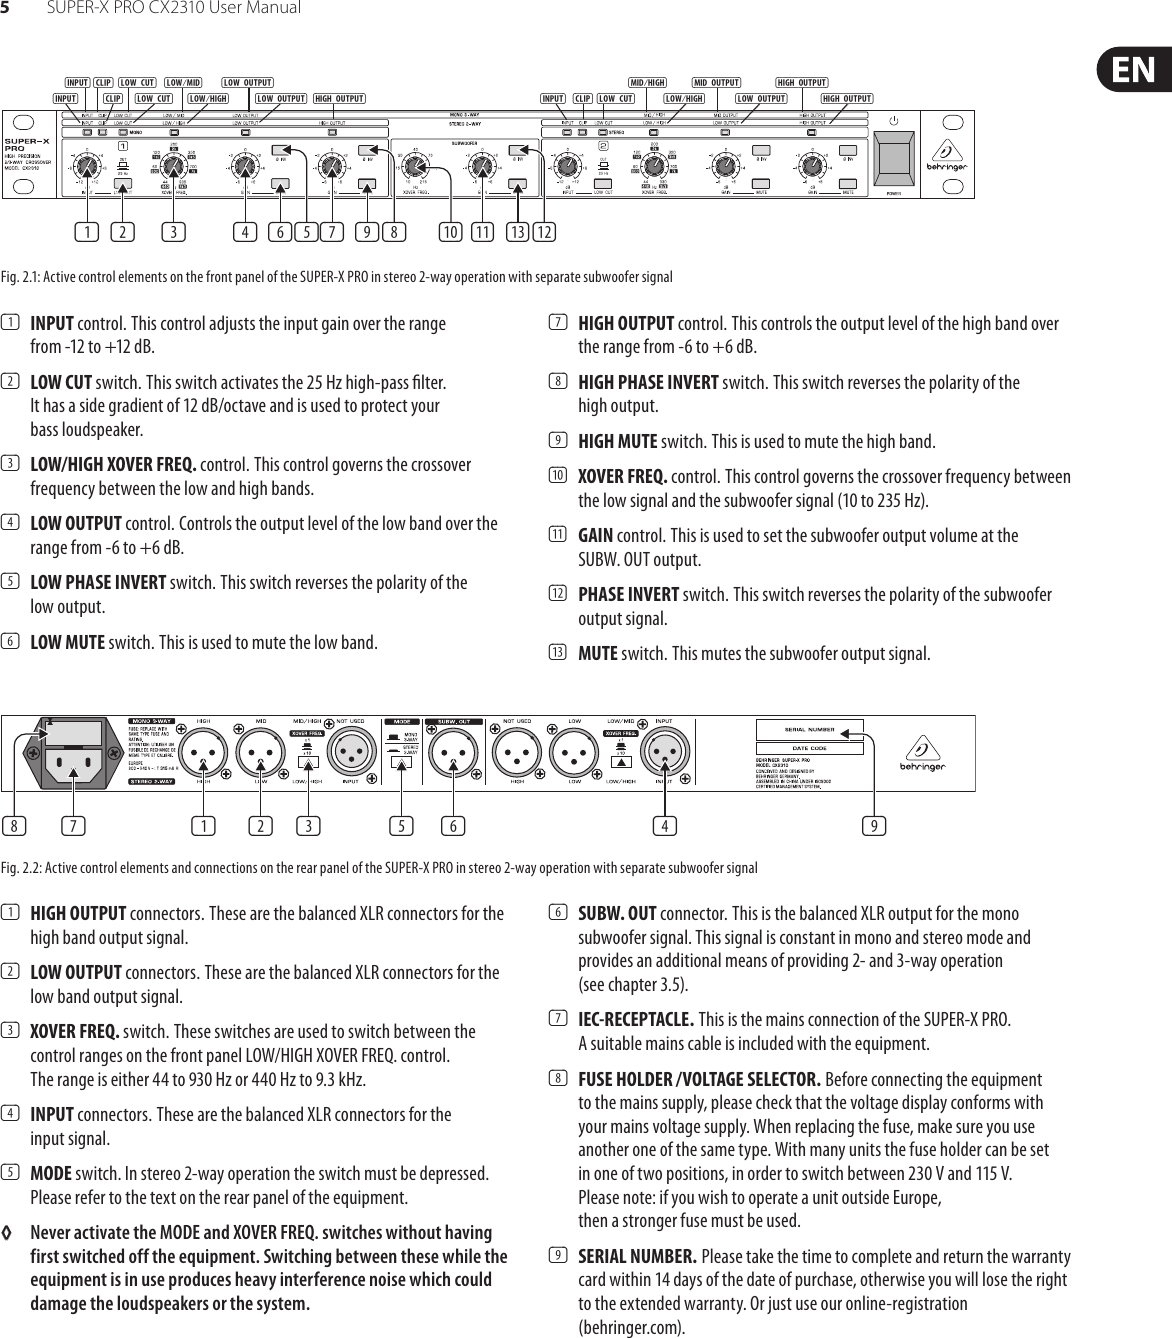 Page 5 of 10 - Behringer Behringer-Super-X-Pro-Cx2310-Users-Manual- SUPER-X PRO CX2310  Behringer-super-x-pro-cx2310-users-manual